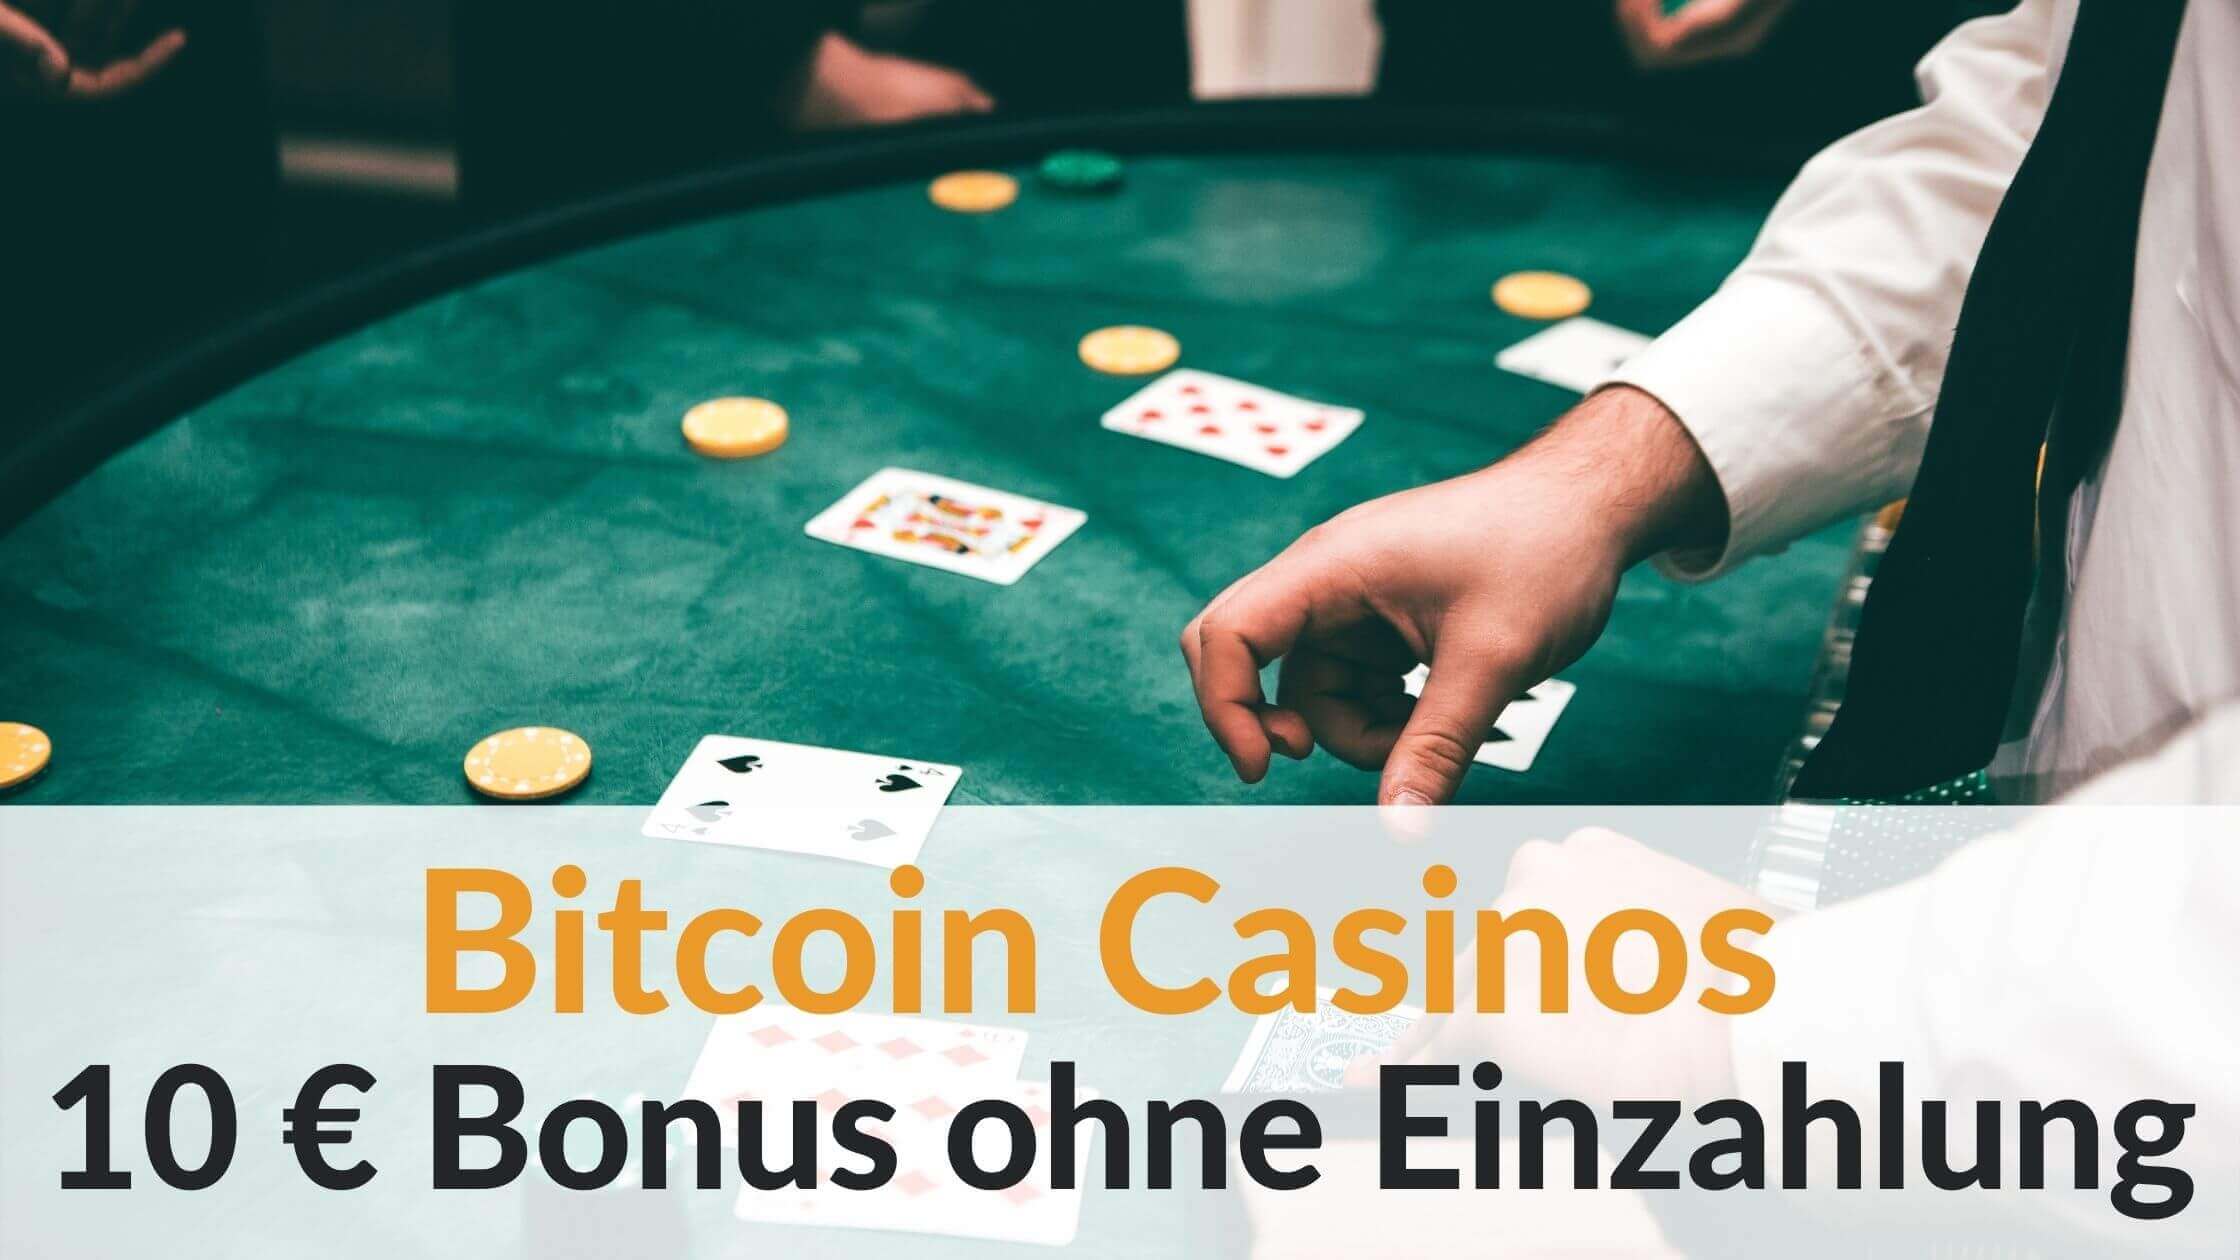 Now You Can Have The Best Crypto Casino Of Your Dreams – Cheaper/Faster Than You Ever Imagined